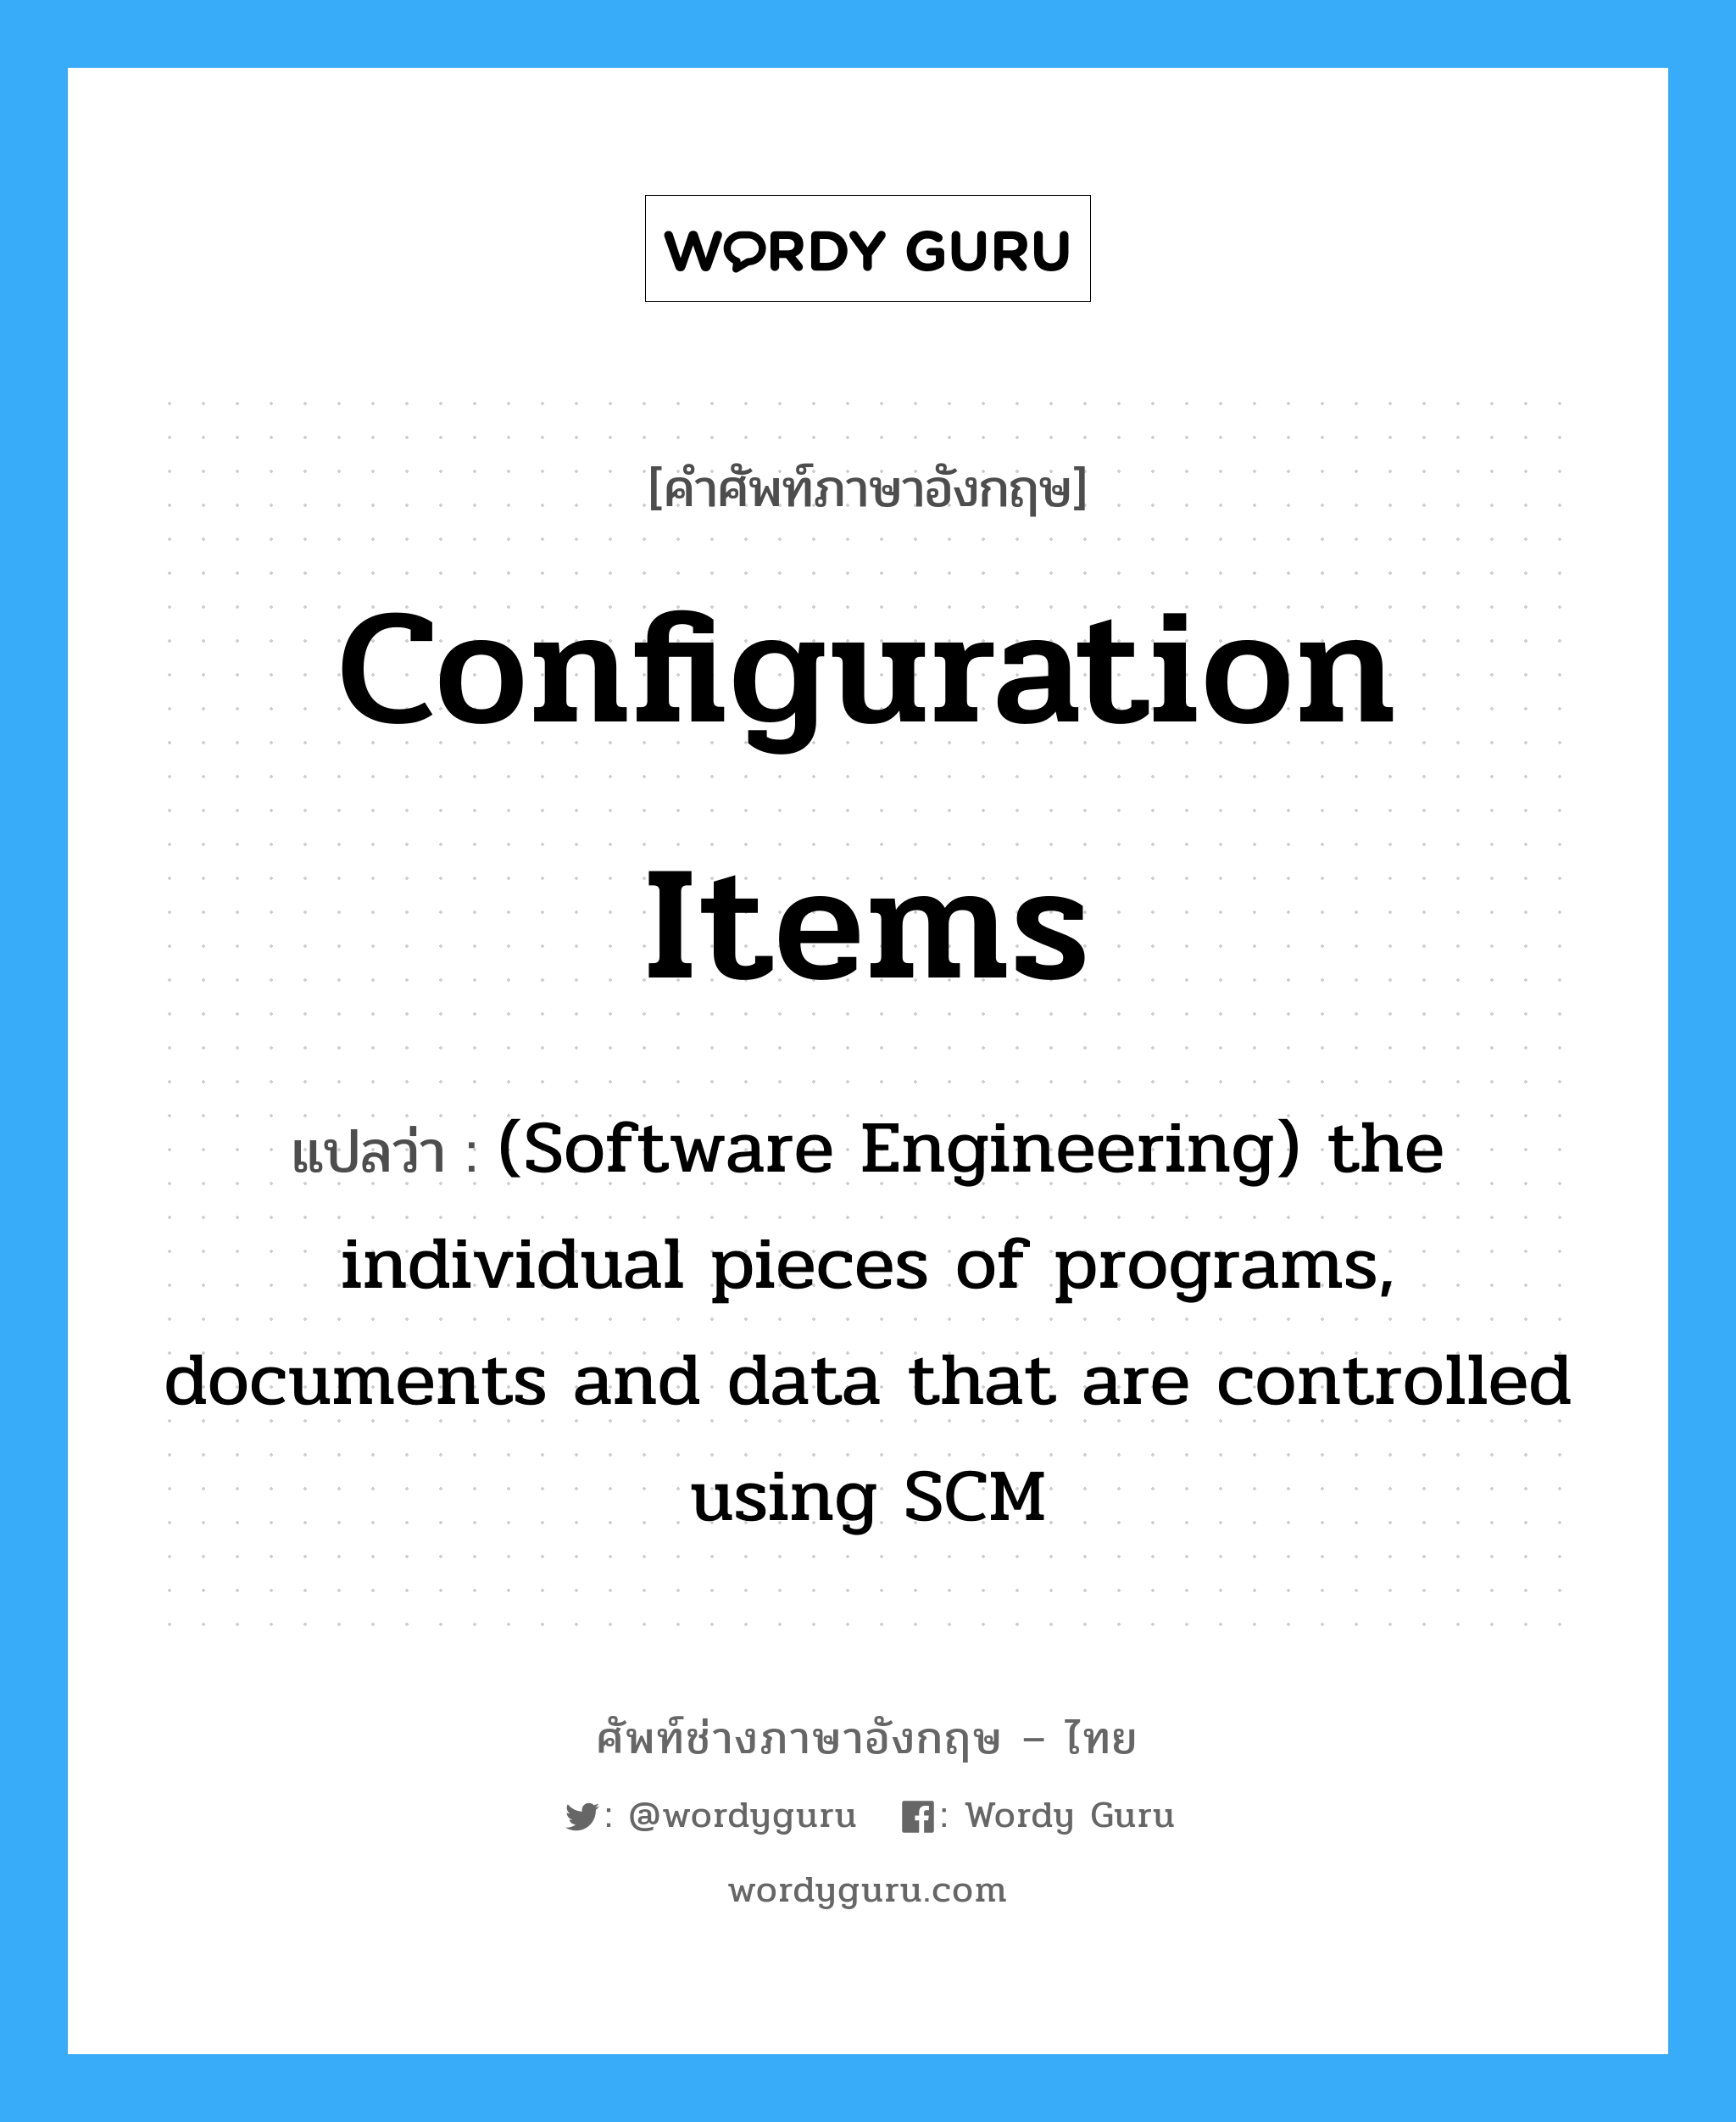 Configuration items แปลว่า?, คำศัพท์ช่างภาษาอังกฤษ - ไทย Configuration items คำศัพท์ภาษาอังกฤษ Configuration items แปลว่า (Software Engineering) the individual pieces of programs, documents and data that are controlled using SCM